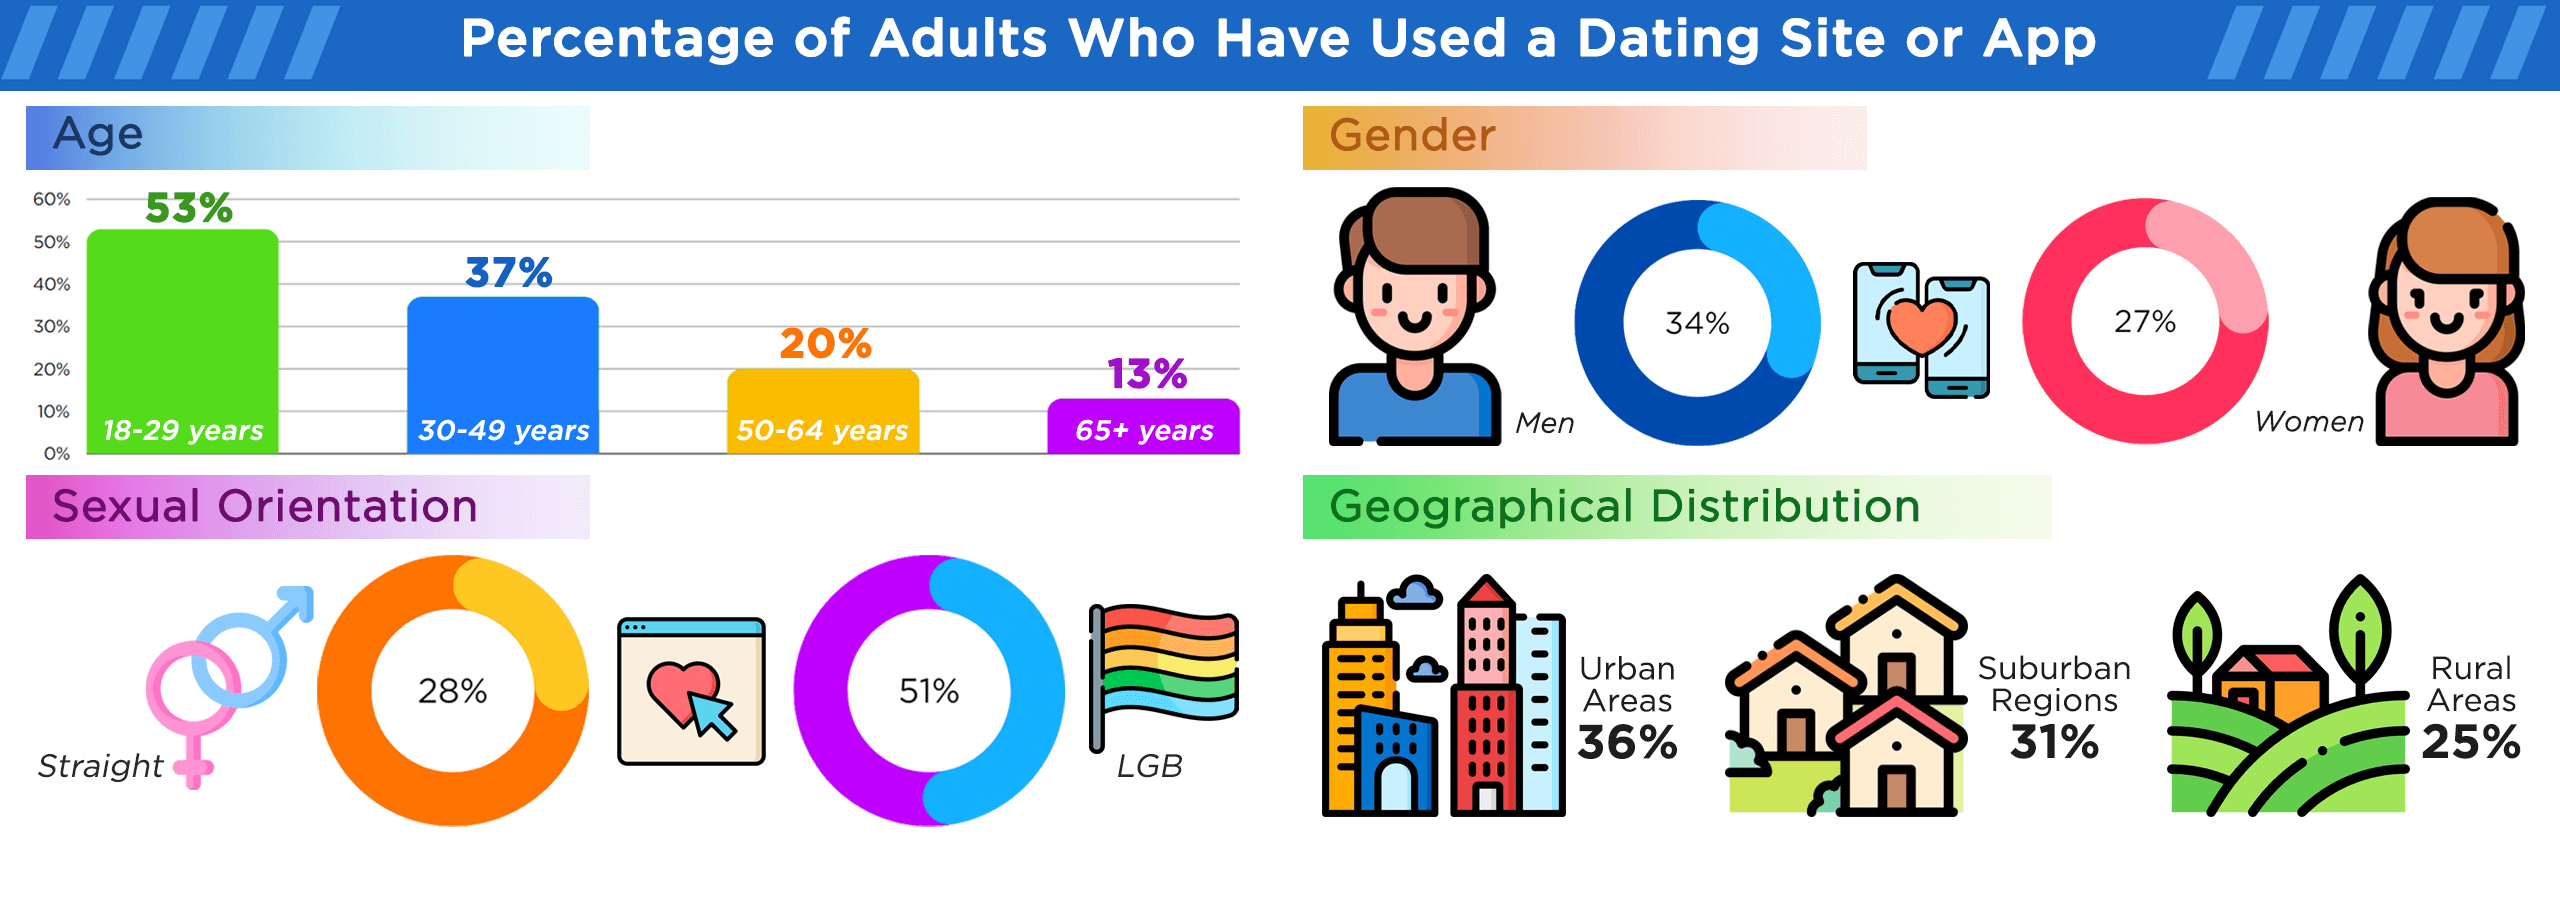 Percentage of adults who have used a dating site or app